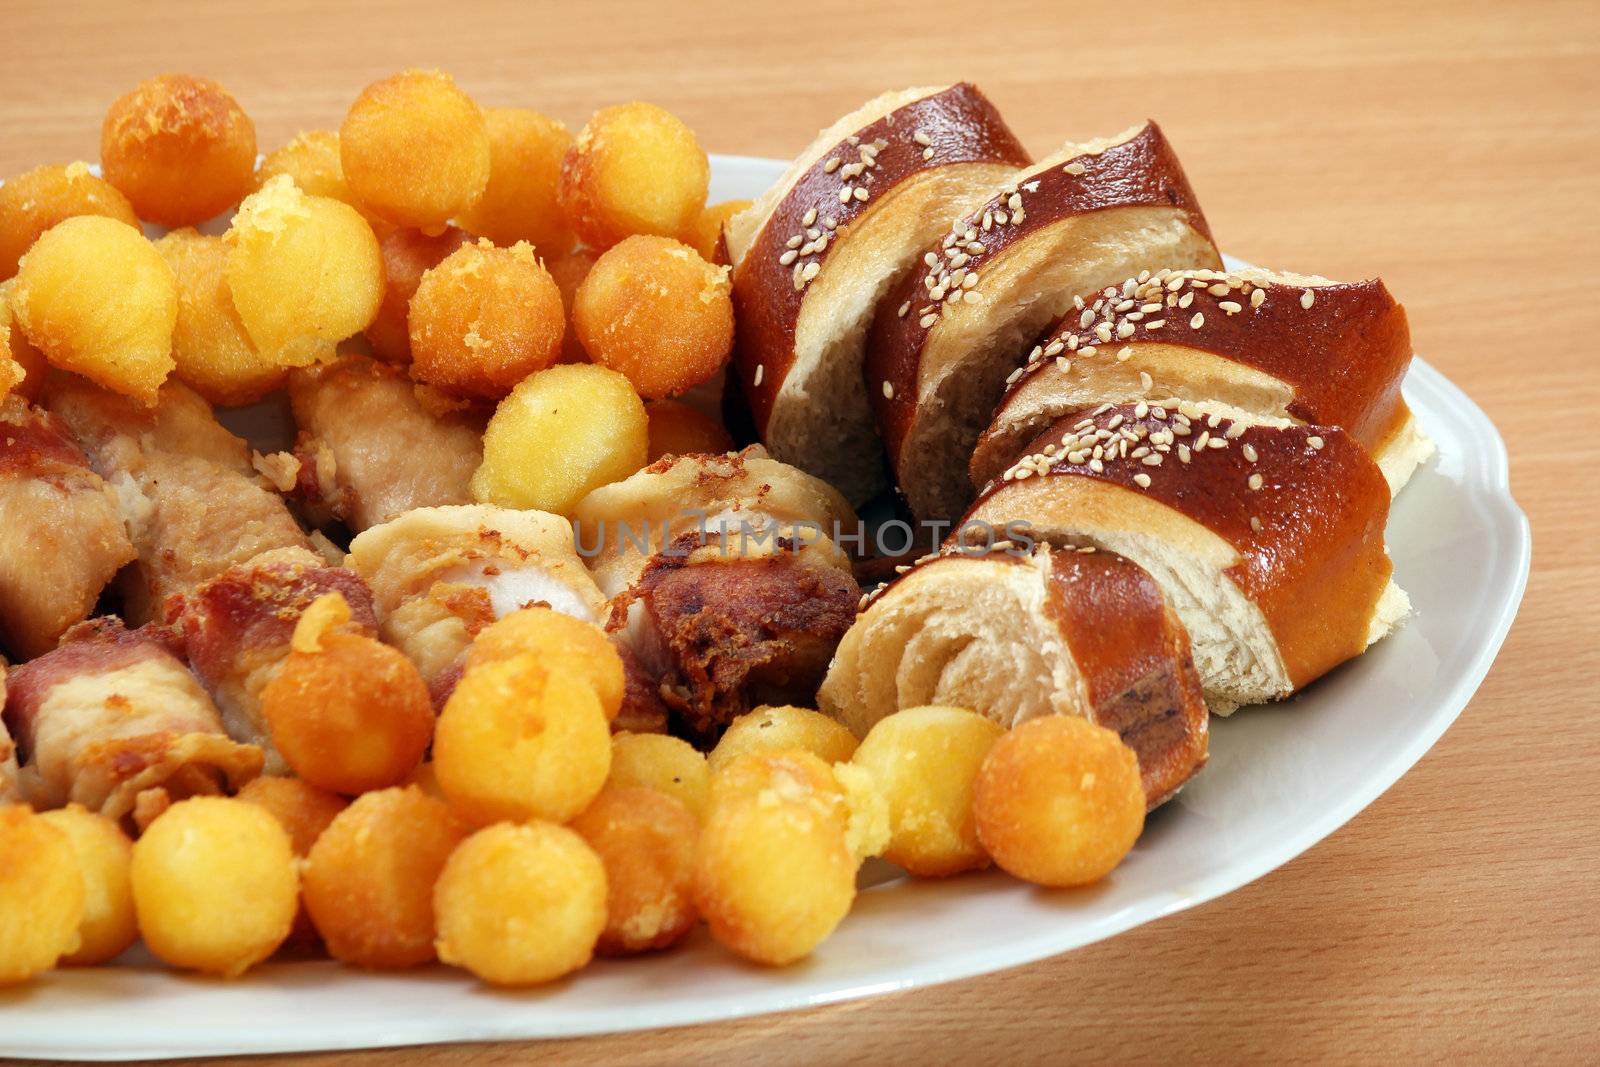 bread meat and potatoes on plate gourmet food